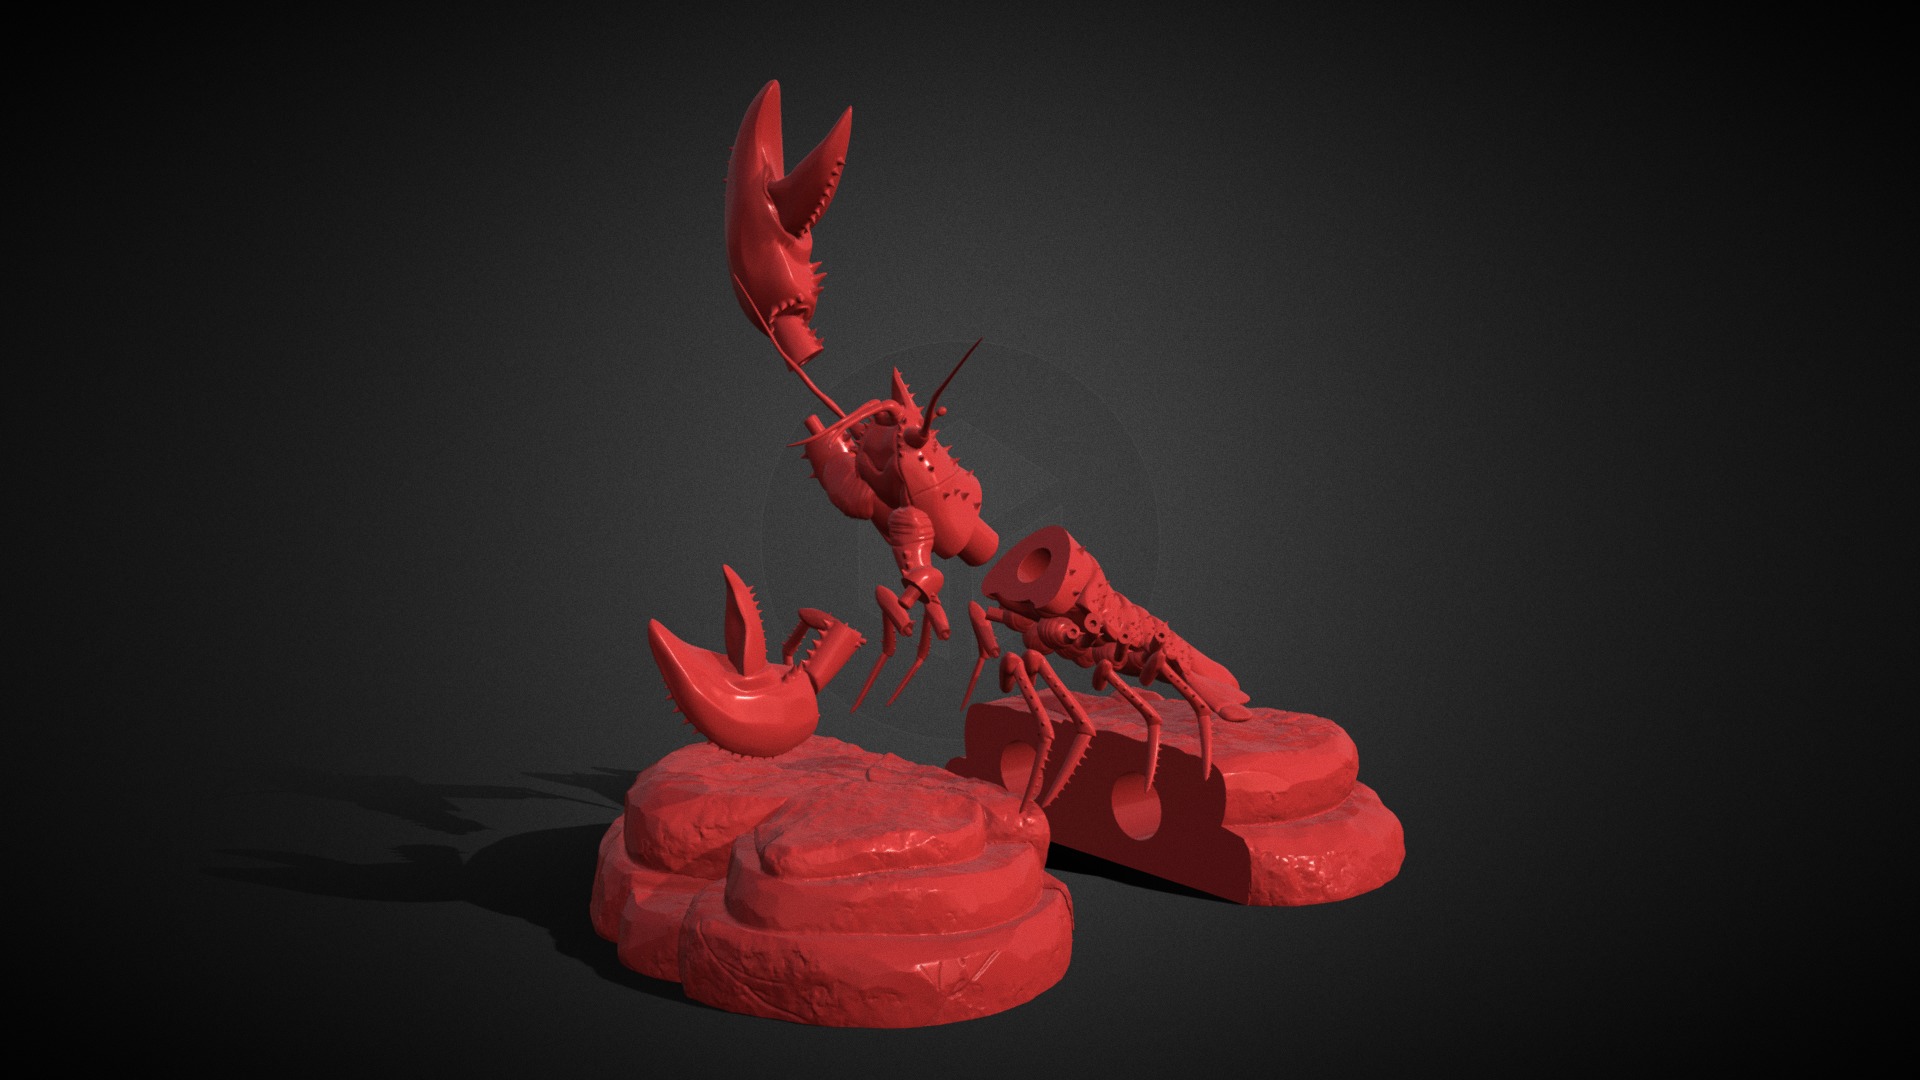 3D model Lobster Ready For 3D Print - This is a 3D model of the Lobster Ready For 3D Print. The 3D model is about a group of red figurines.